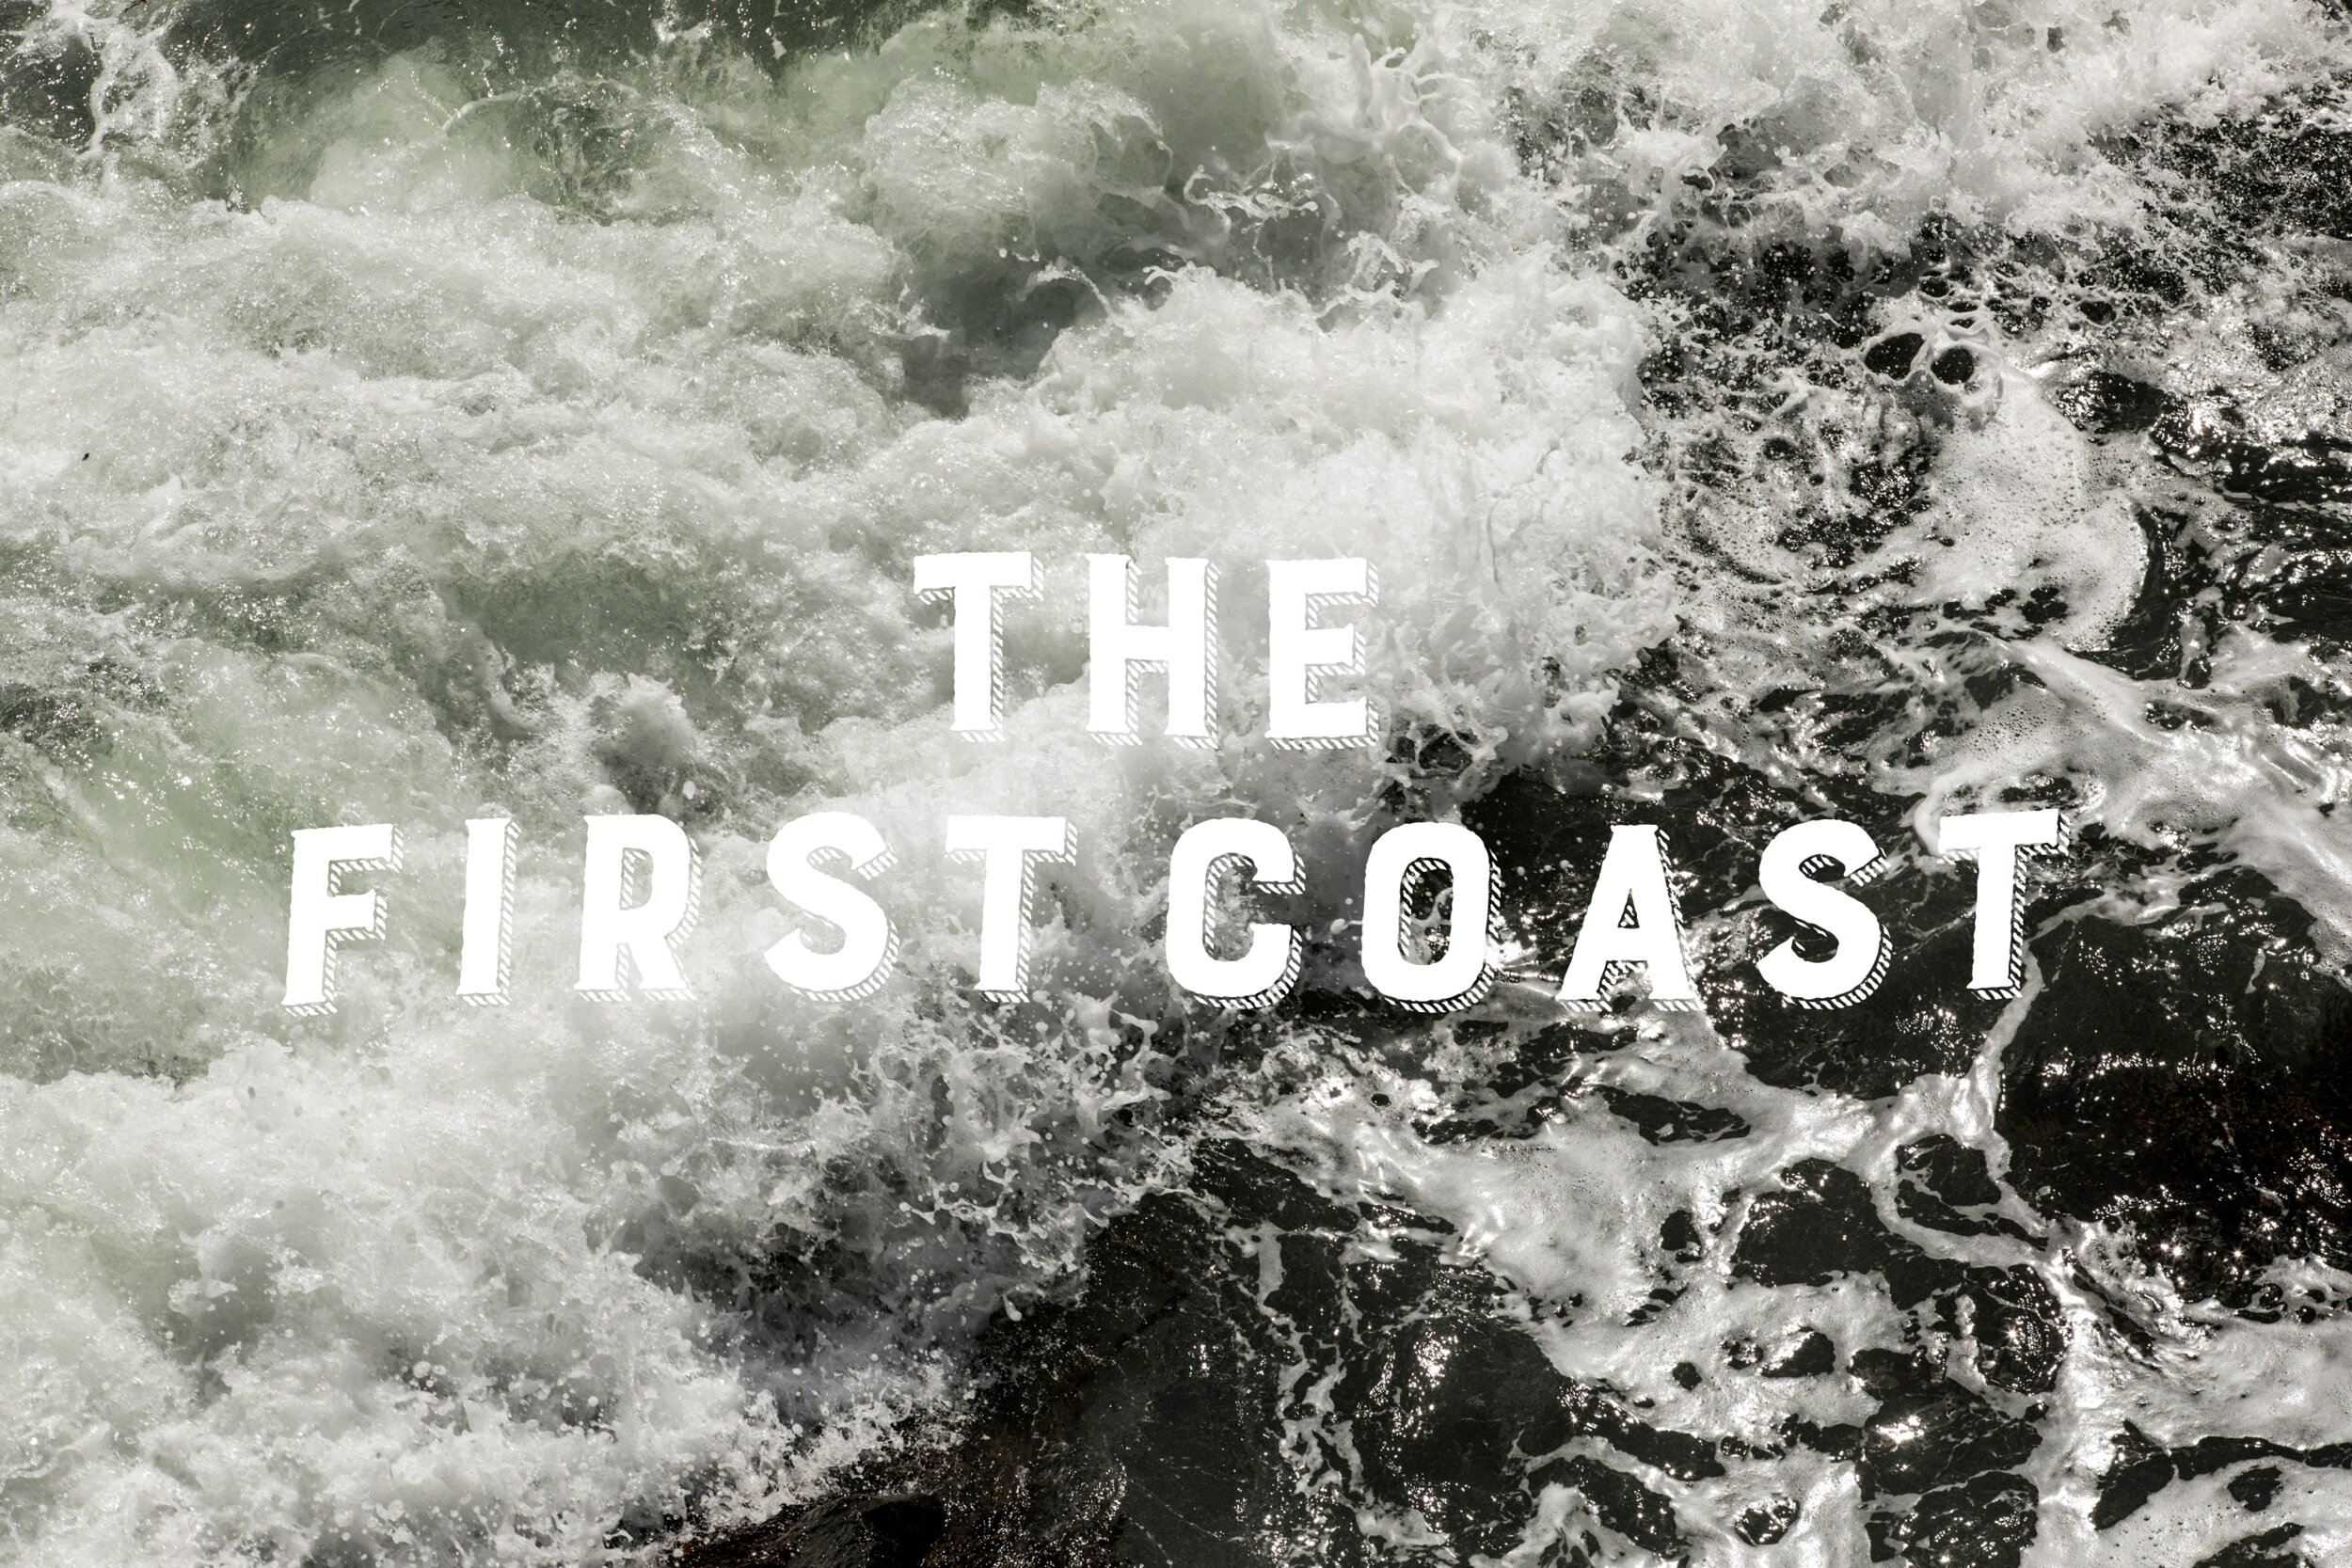  The First Coast is a mobile studio / exhibition space that travels to year-round coastal communities in Maine during the off-season. Through interviews, exhibitions, and soundwalks, TFC engages residents in conversation about their community’s worki